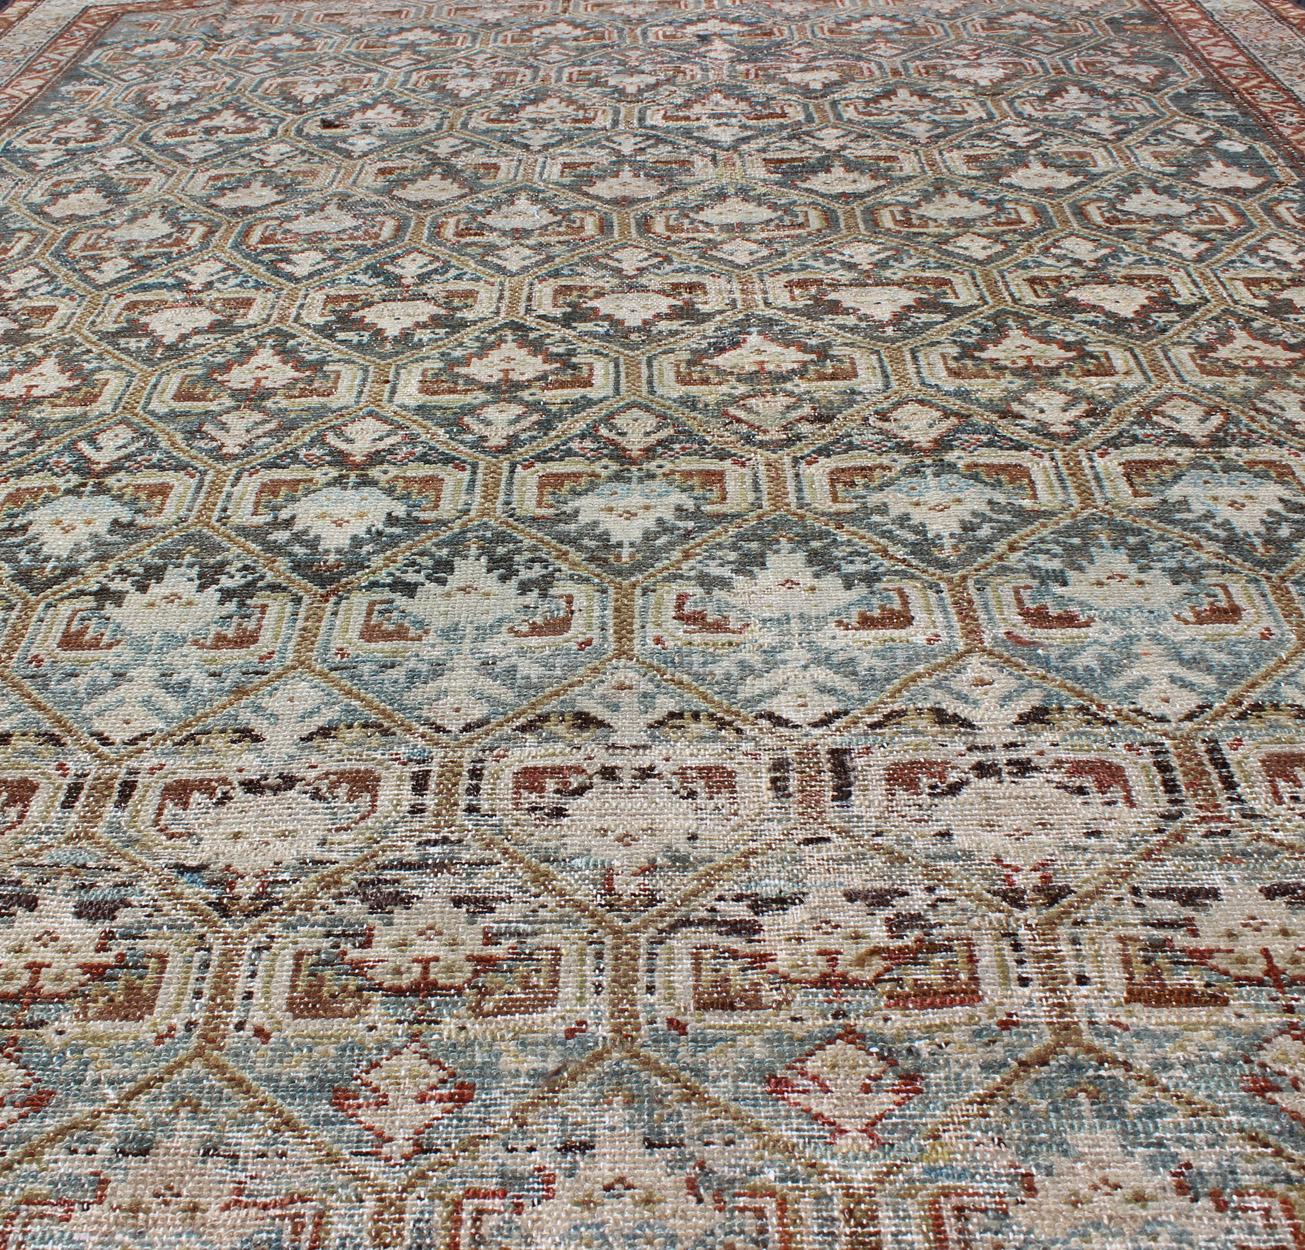 Wool Antique Persian Fine Senneh Distressed Rug with All-Over Geometric Design